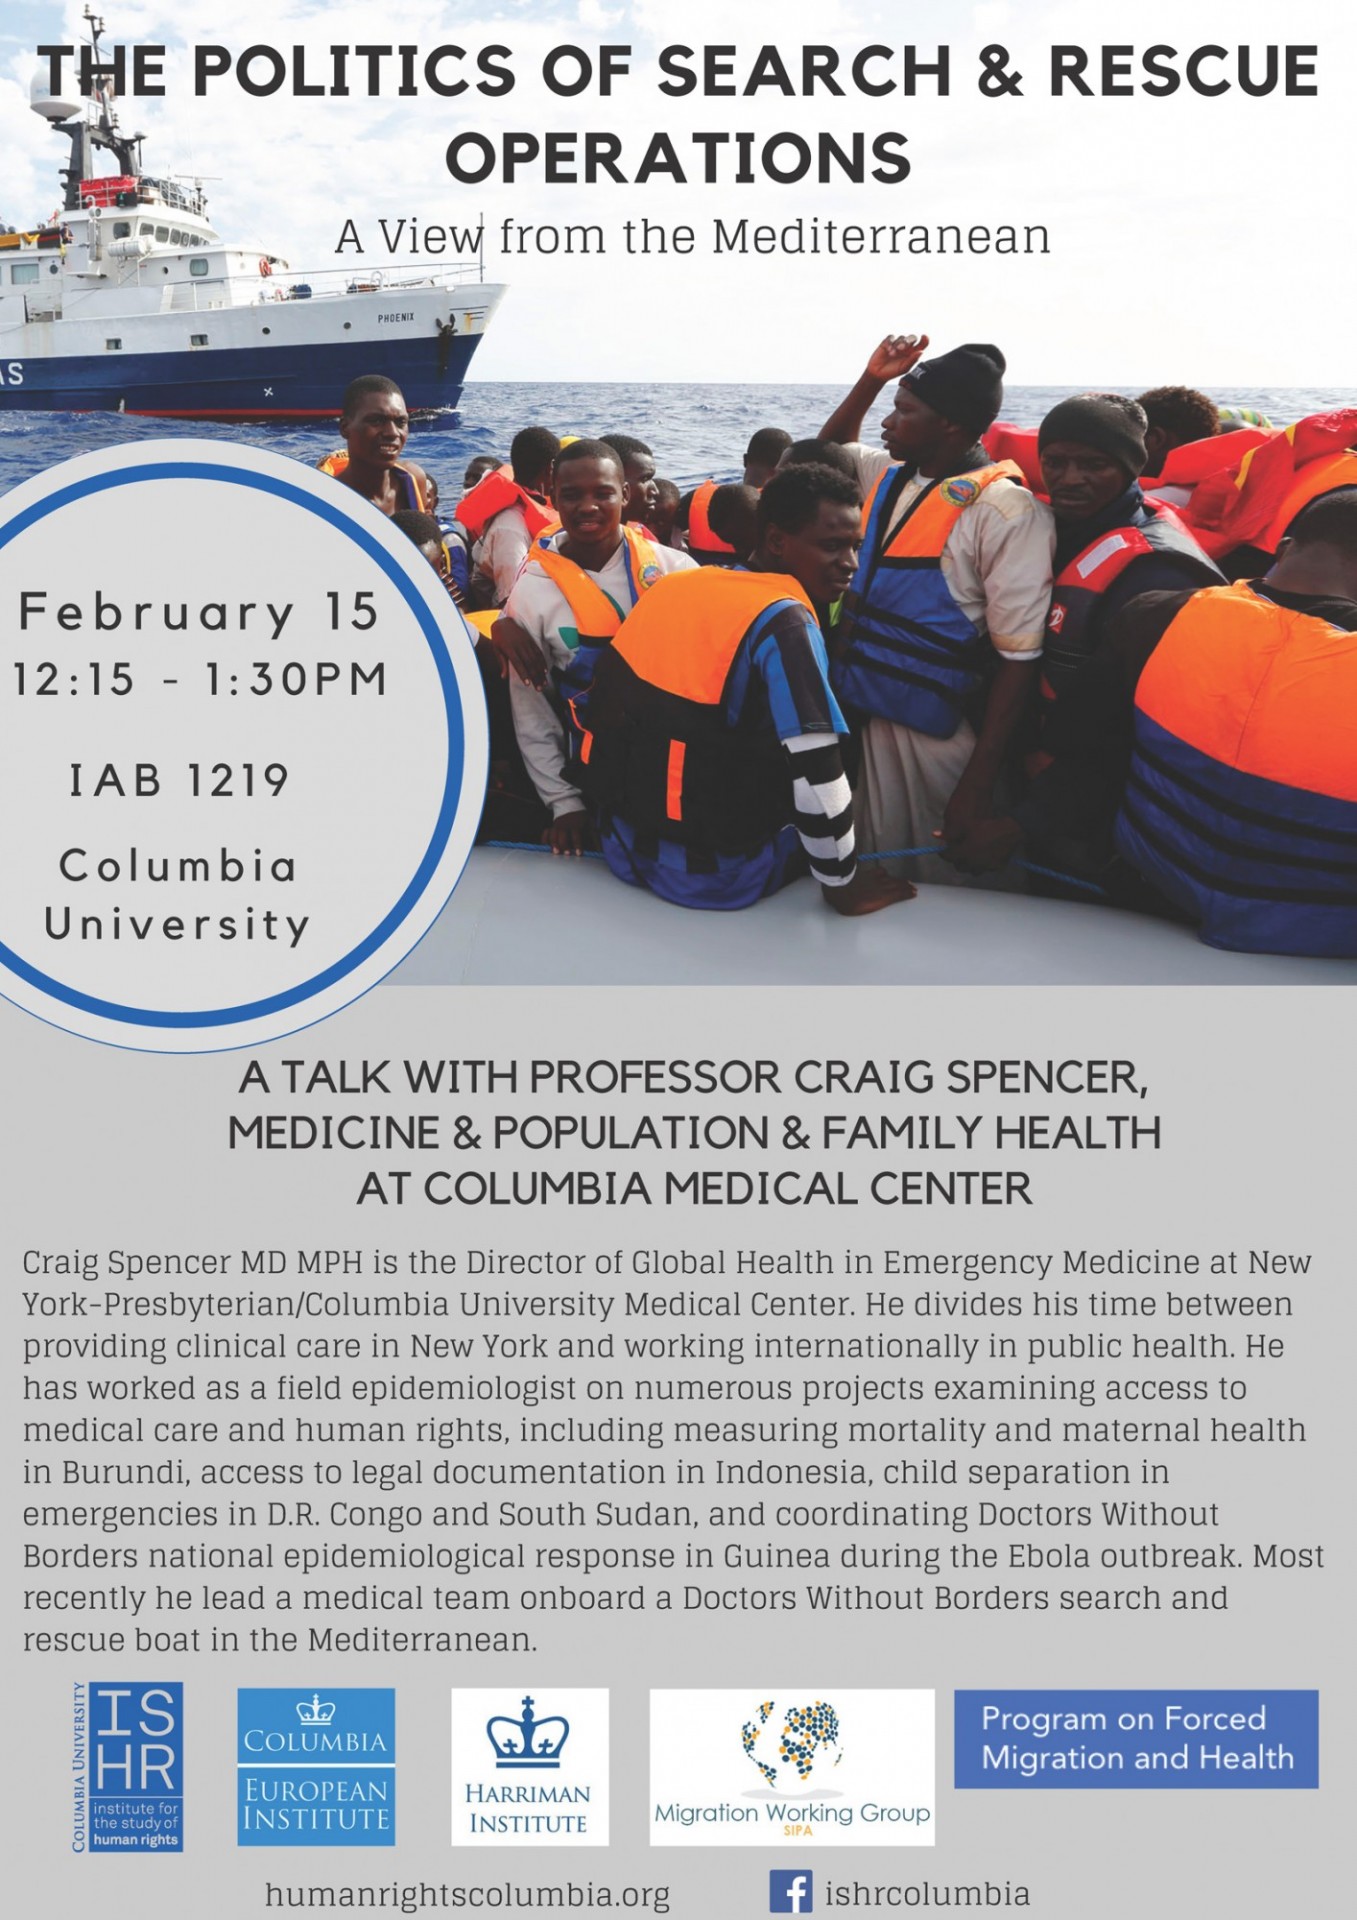 Flyer for "The Politics of Search and Rescue" event, with text details over a photo over people with life jackets on a boat. 